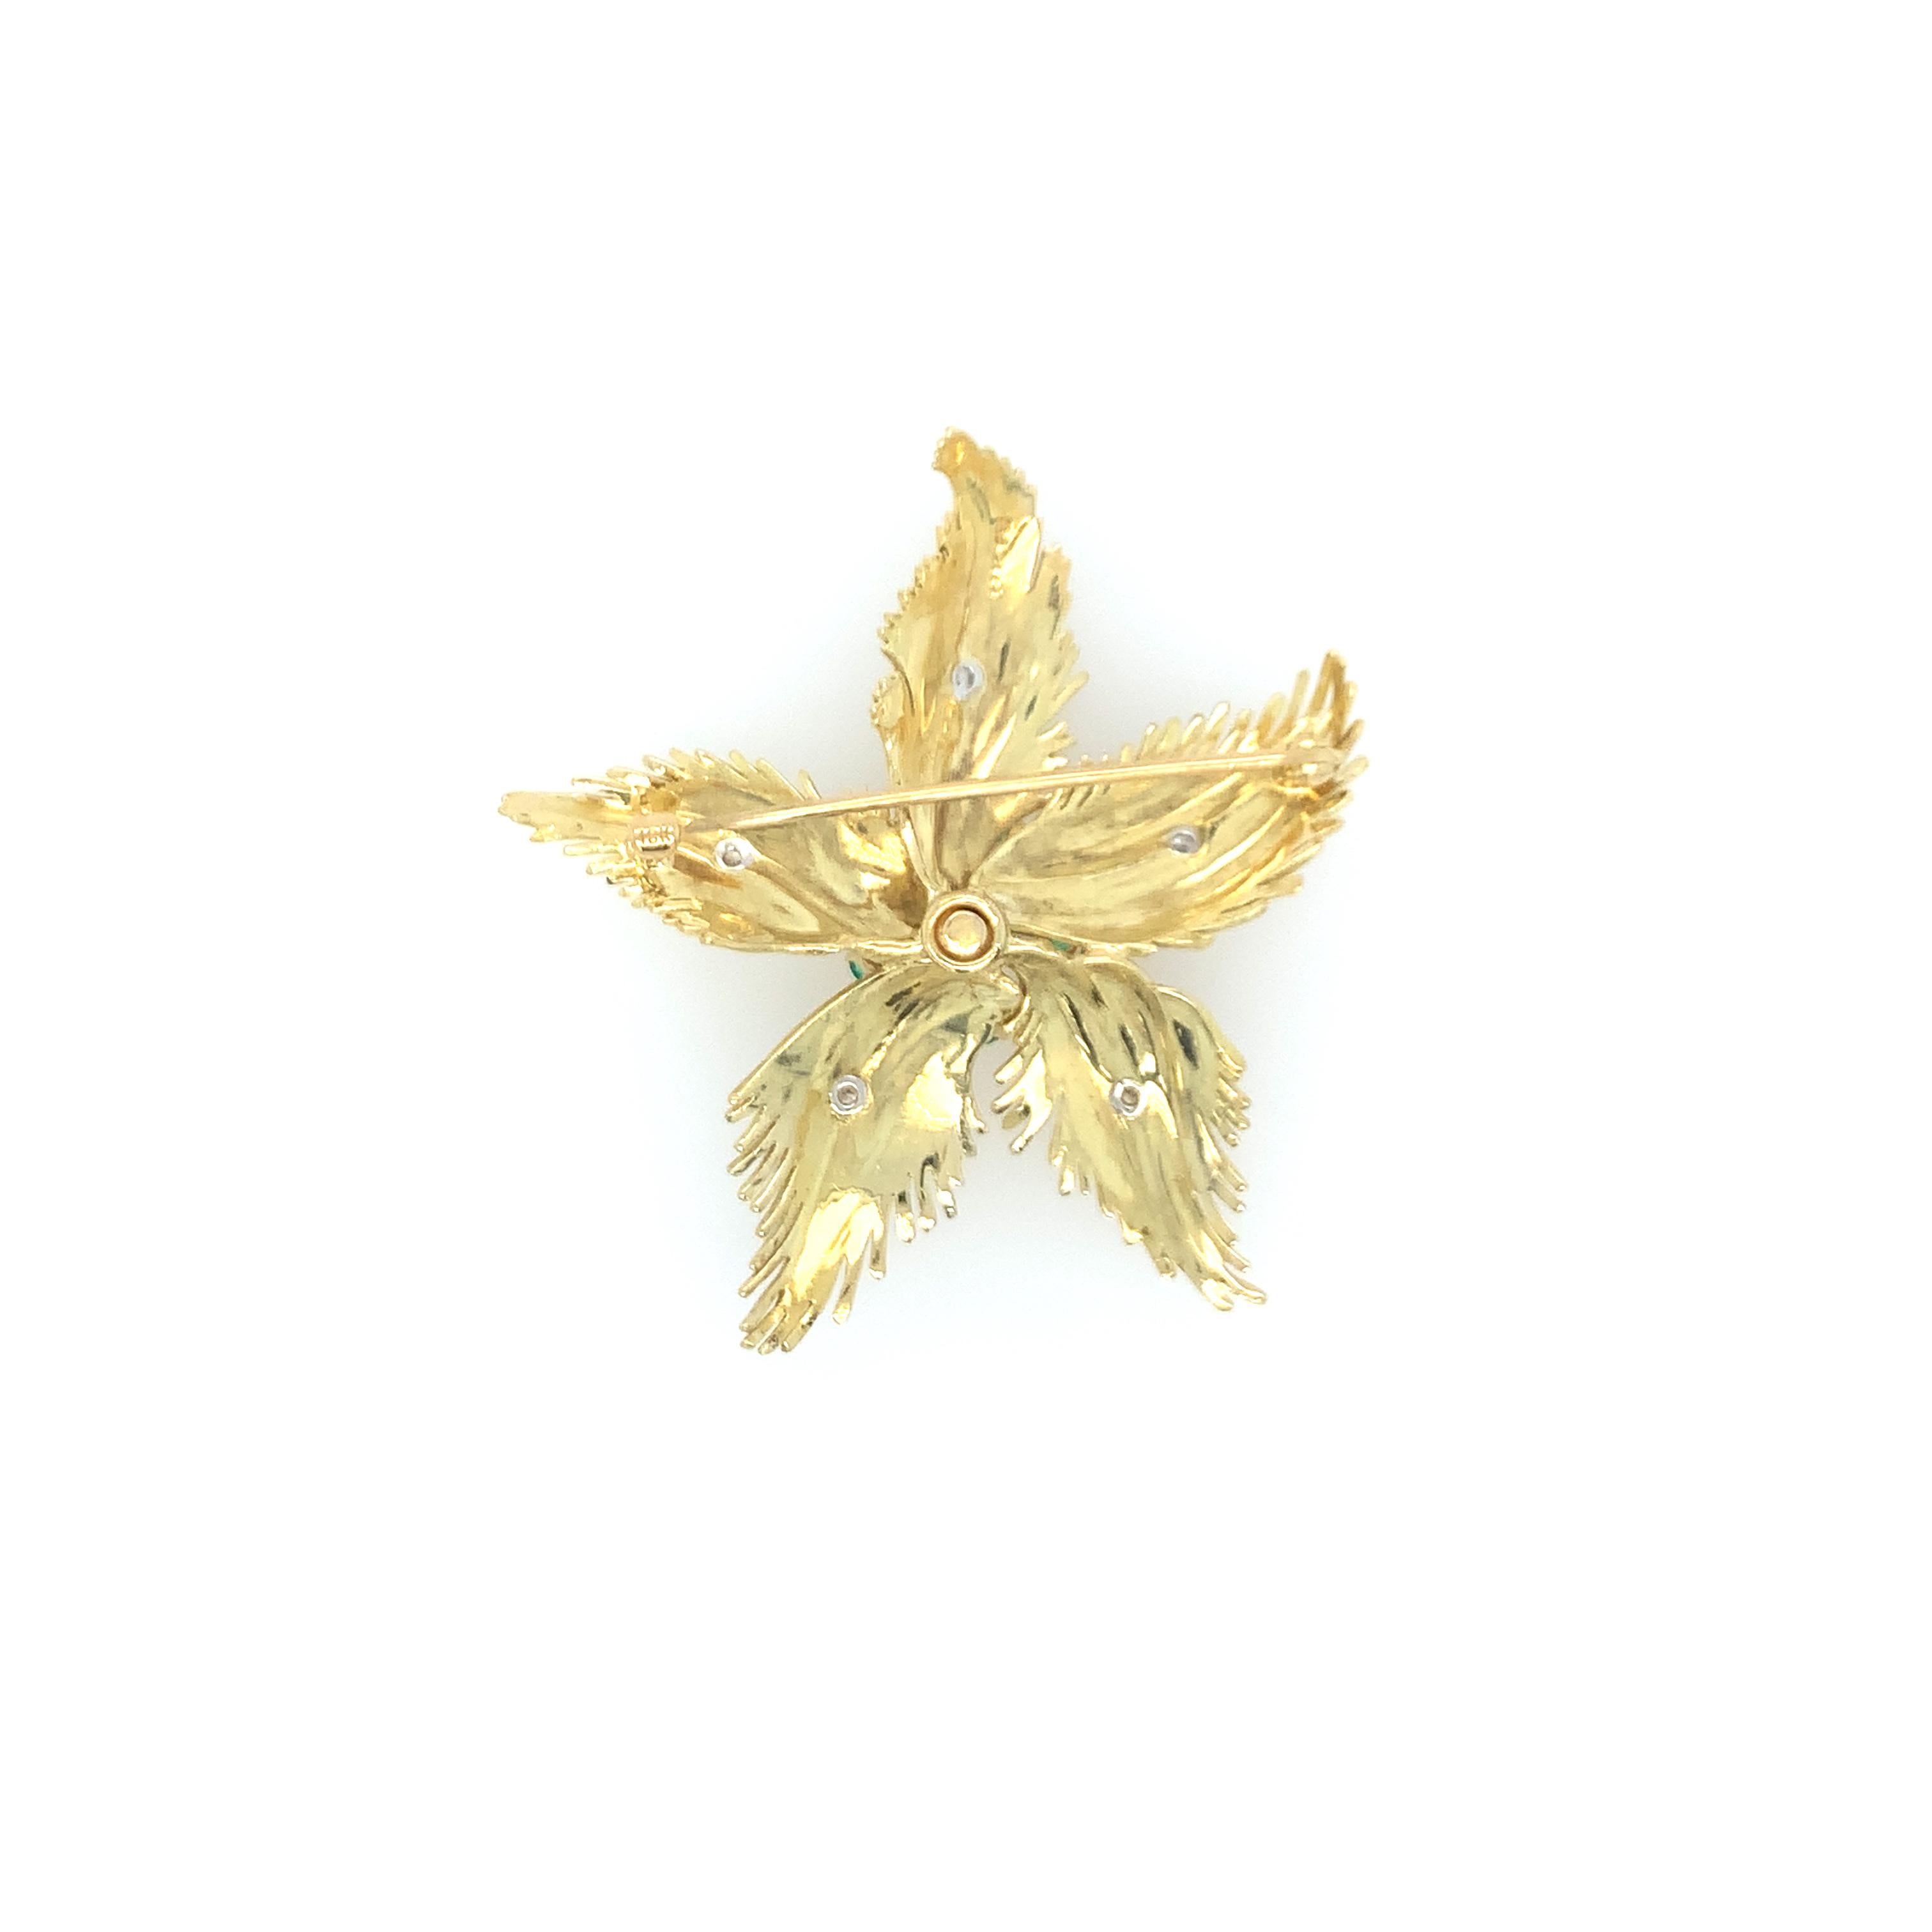 A treasured 18K yellow gold intricate floral brooch featuring (5) feathered gold petals, each highlighted by a single cut diamond. At the center of the floral pin sits a single round diamond surrounded by (5) five emeralds weighing approximately .30